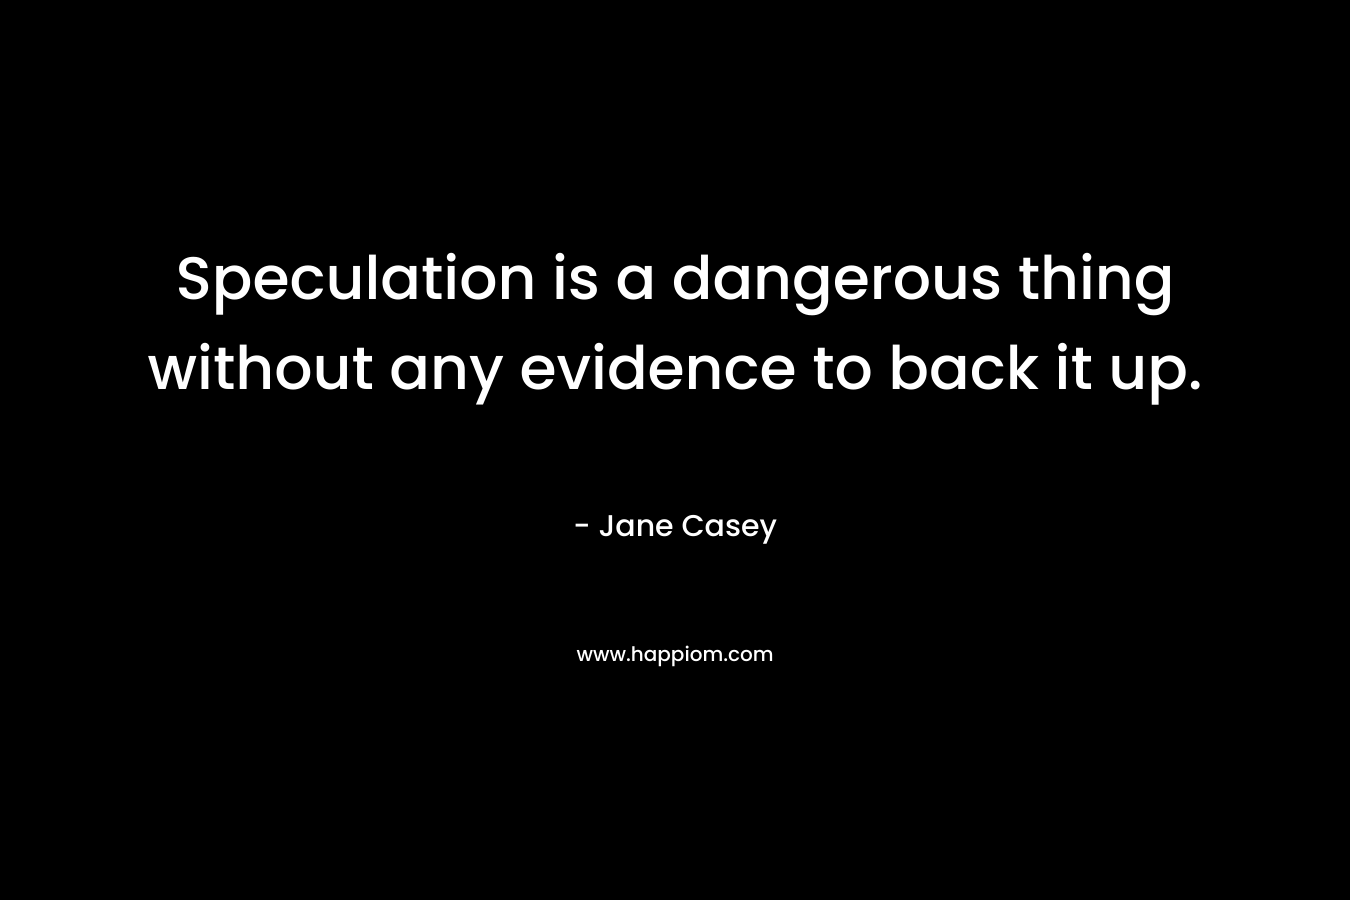 Speculation is a dangerous thing without any evidence to back it up. – Jane Casey